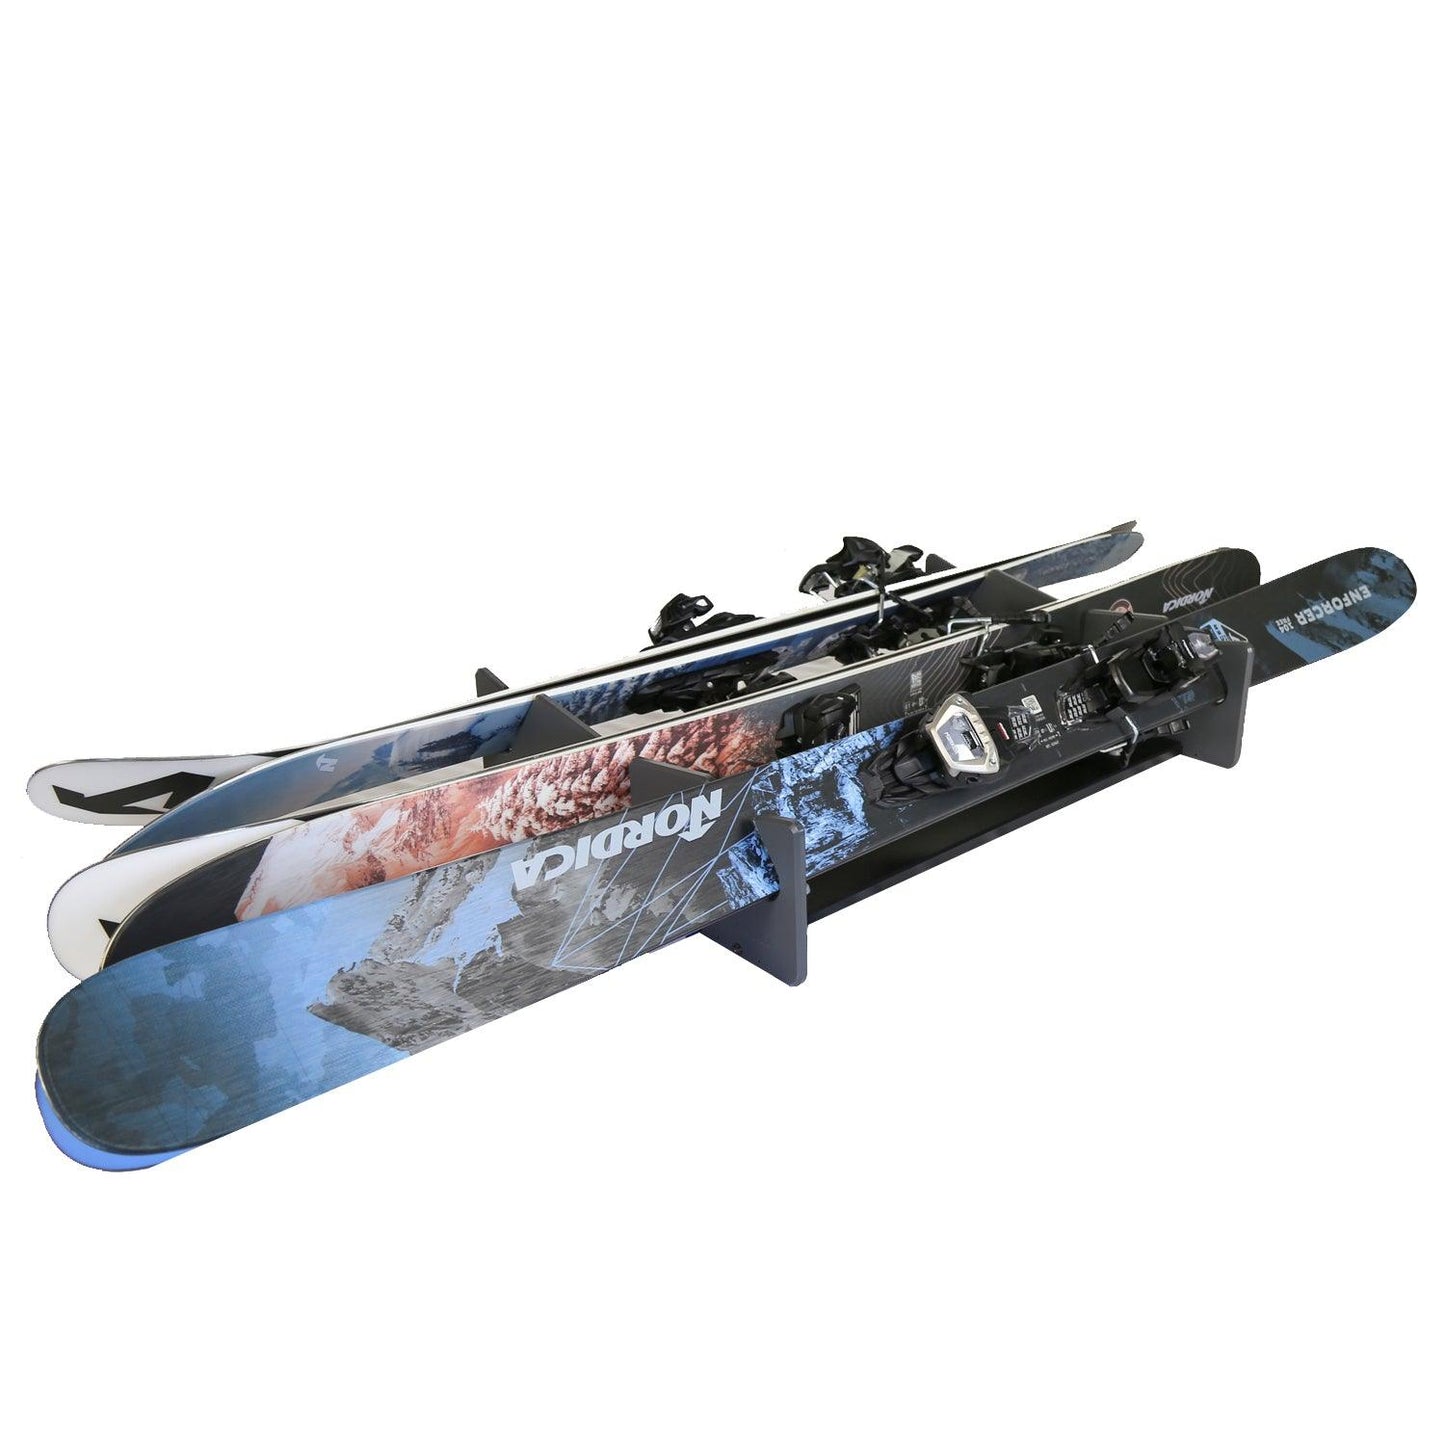 TRAPSKI LowPro 3 M Ski and Snowboard Rack Insert for Rooftop Cargo Box | High Quality Marine Grade HDPE Plastic | UV Protected | Premium Strap Included | 3 Year Warranty | Made in the USA - TRAPSKI, LLC